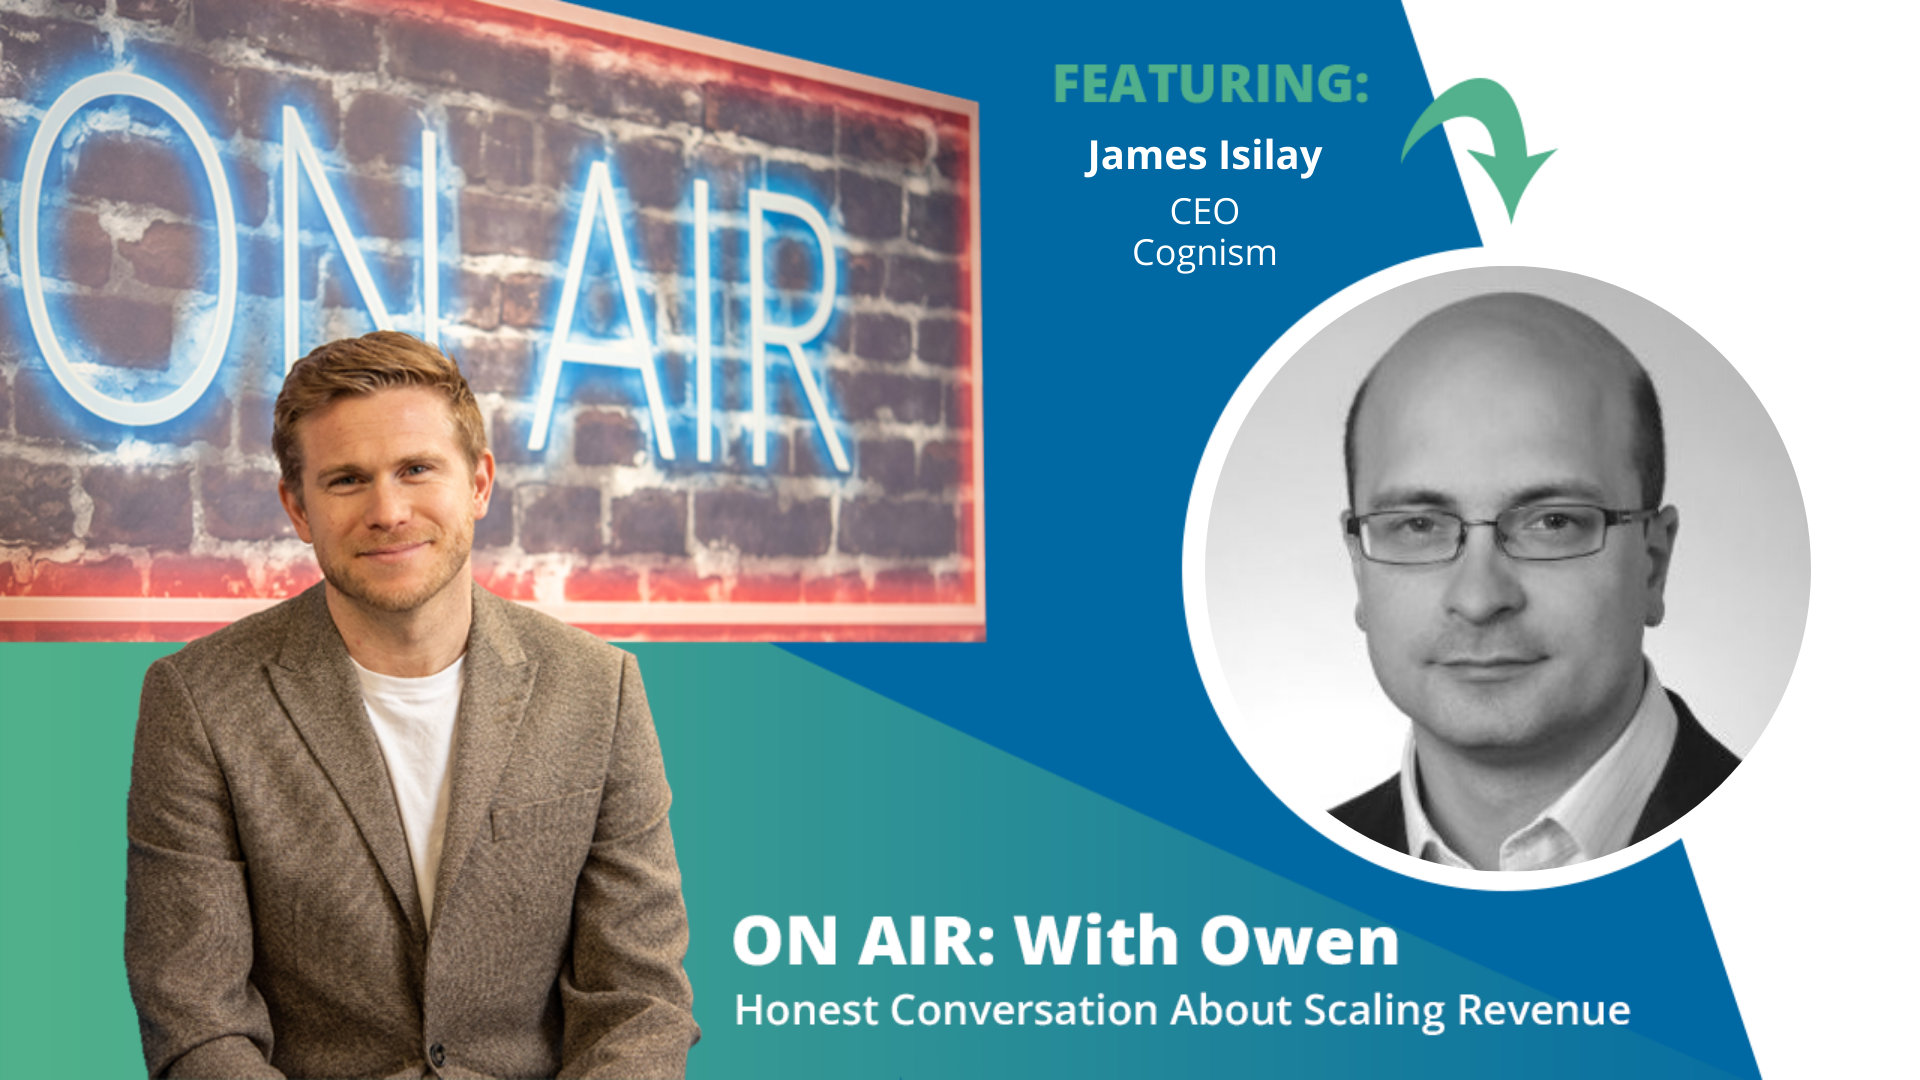 ON AIR: With Owen Episode 55 Featuring James Isilay – CEO of Cognism